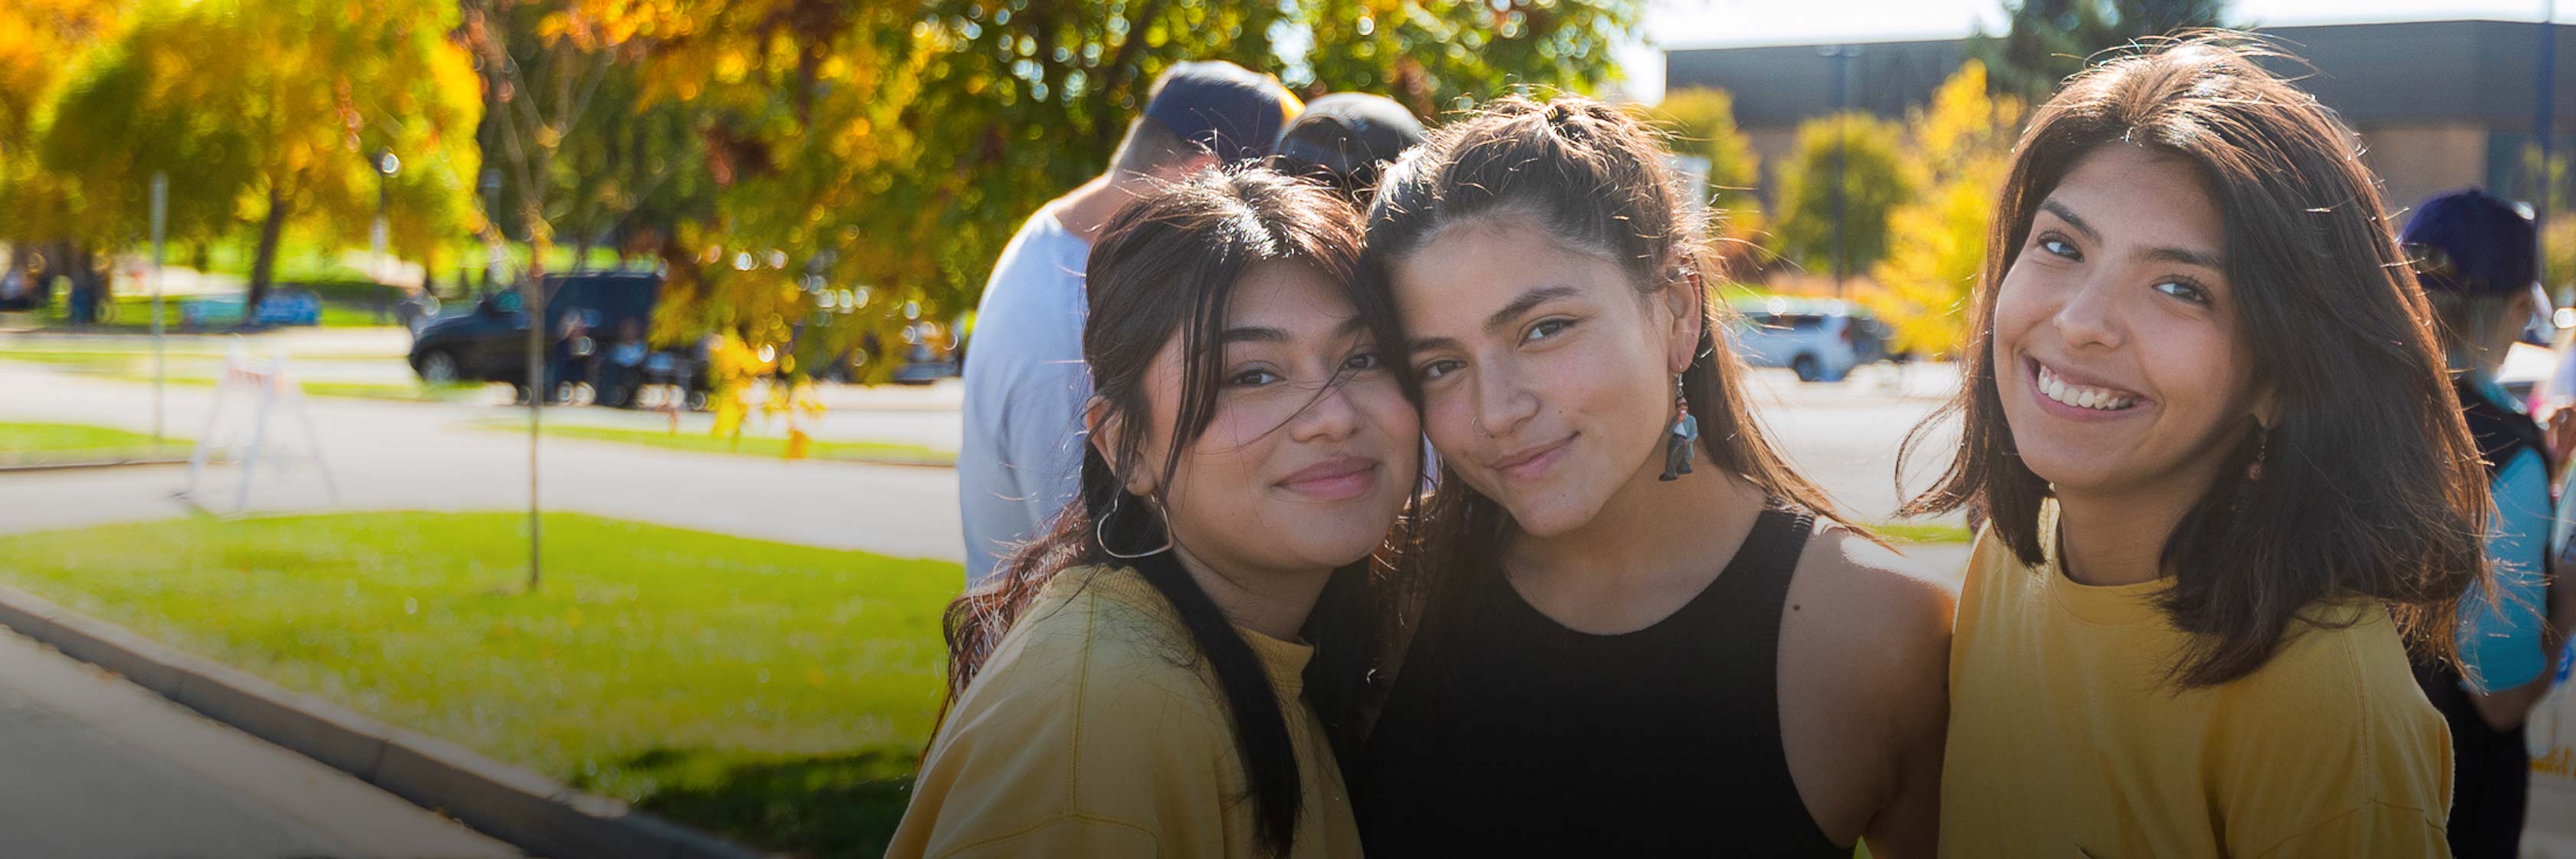 Three college students smiling and standing together outside during an event to celebrate Hispanic/Latinx communities.